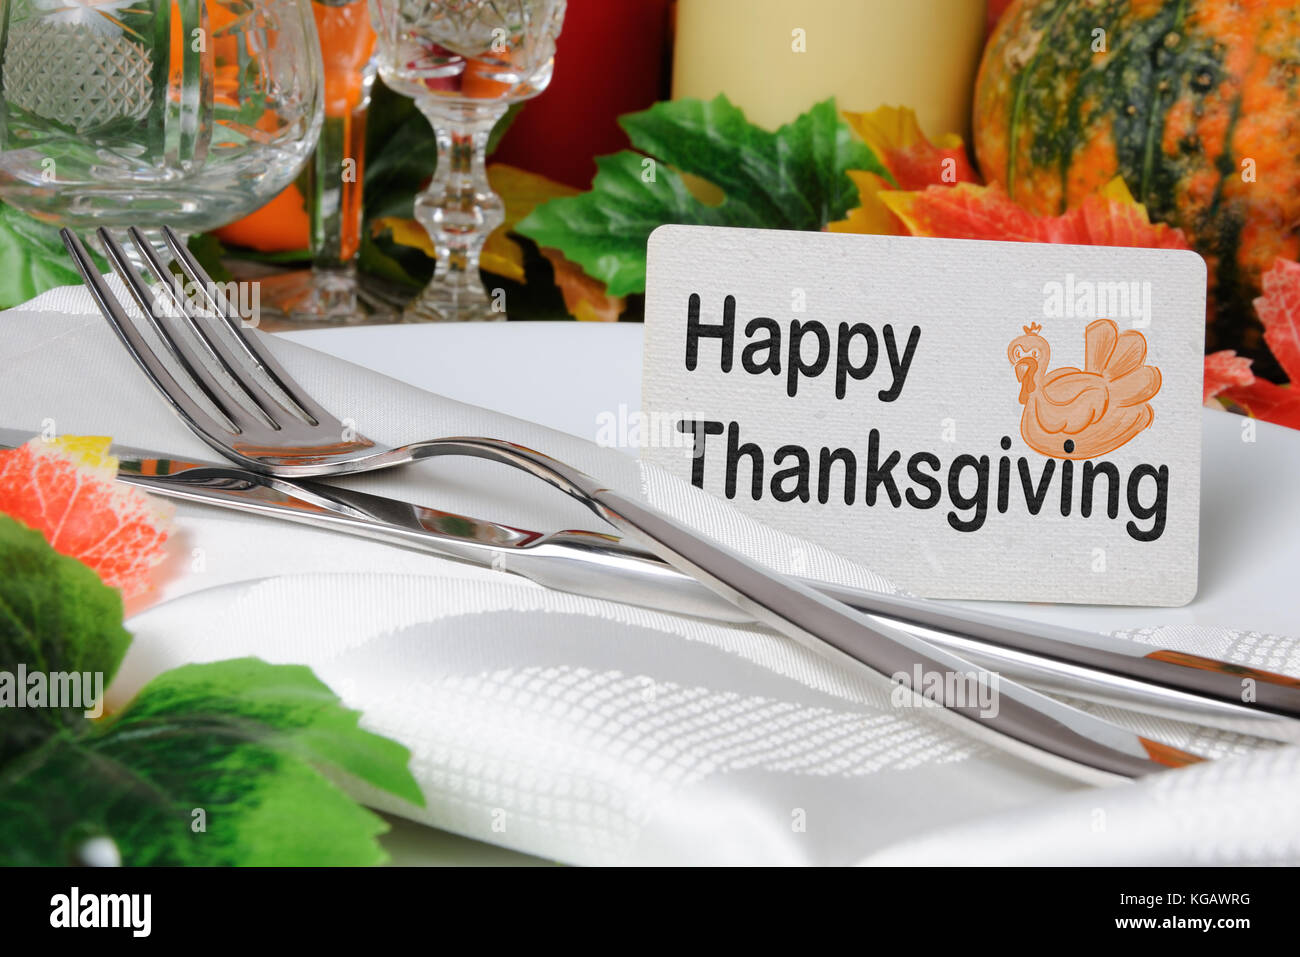 Happy Thanksgiving day card on a plate with a napkin and cutlery on the table Stock Photo